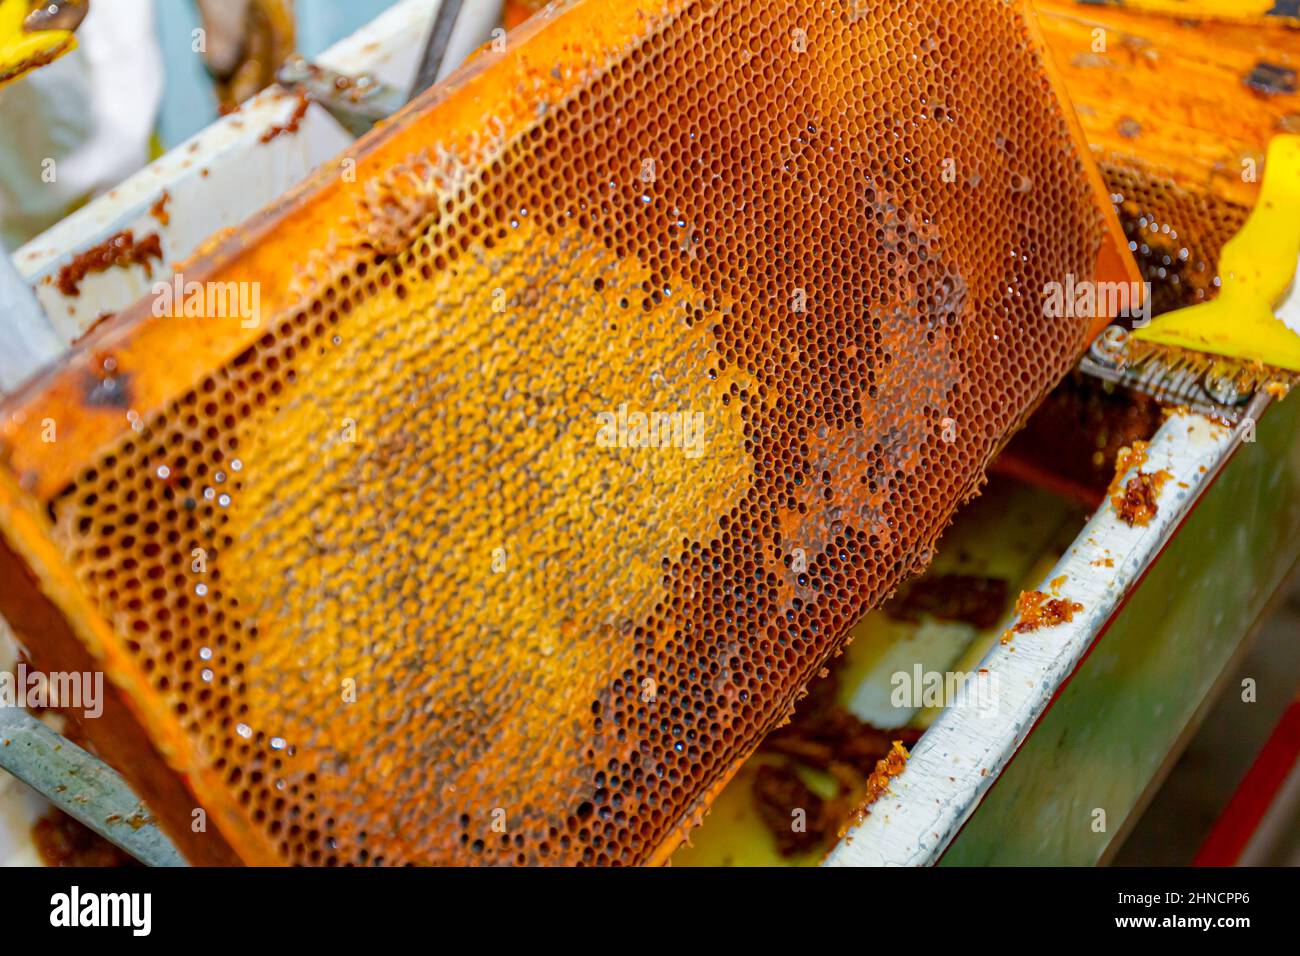 Frame with honeycomb, uncapping honey cells with a beekeeper fork, tool for opening or removing wax caps at harvest, close-up. Stock Photo